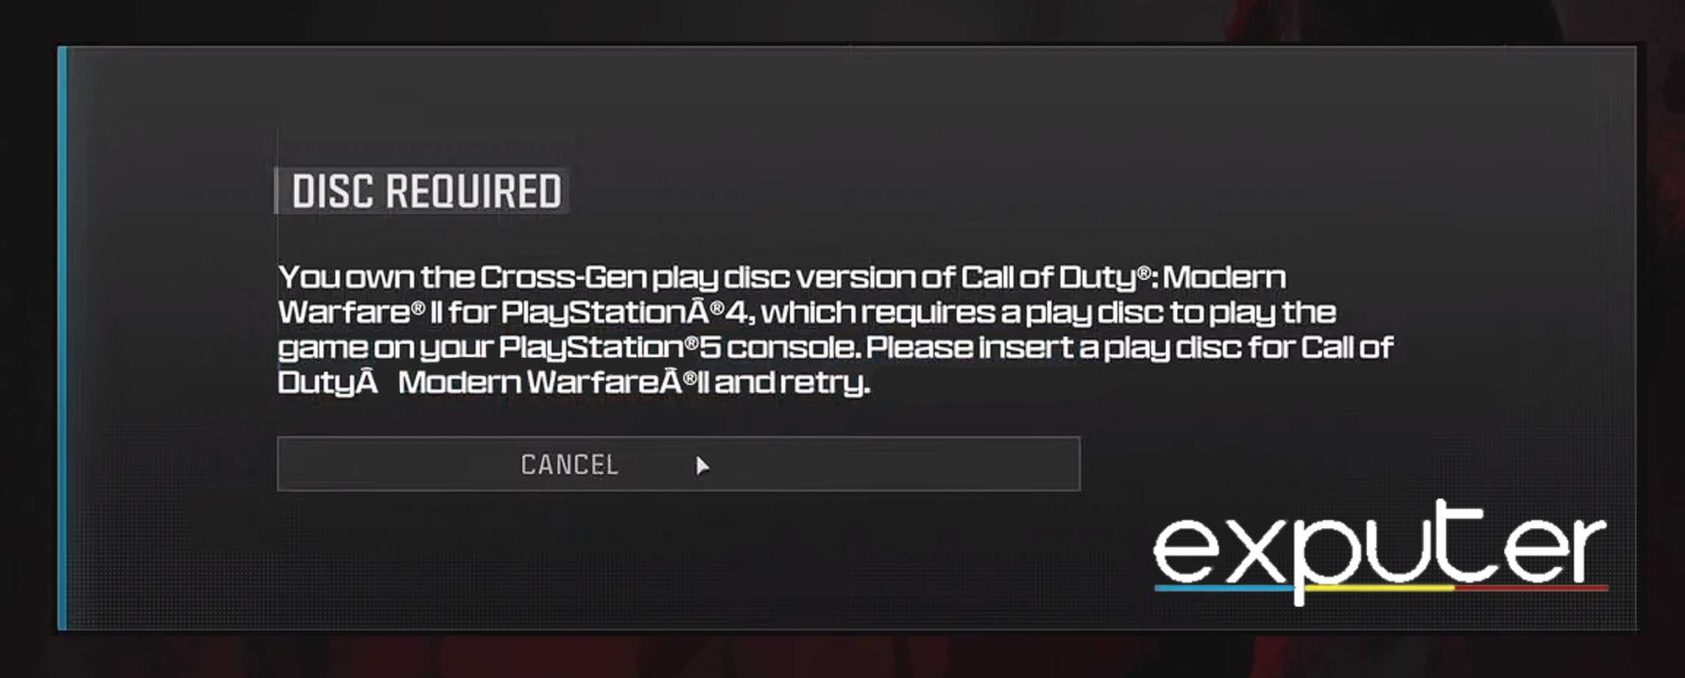 Modern Warfare 3 Disc Required Error. (image by eXputer)